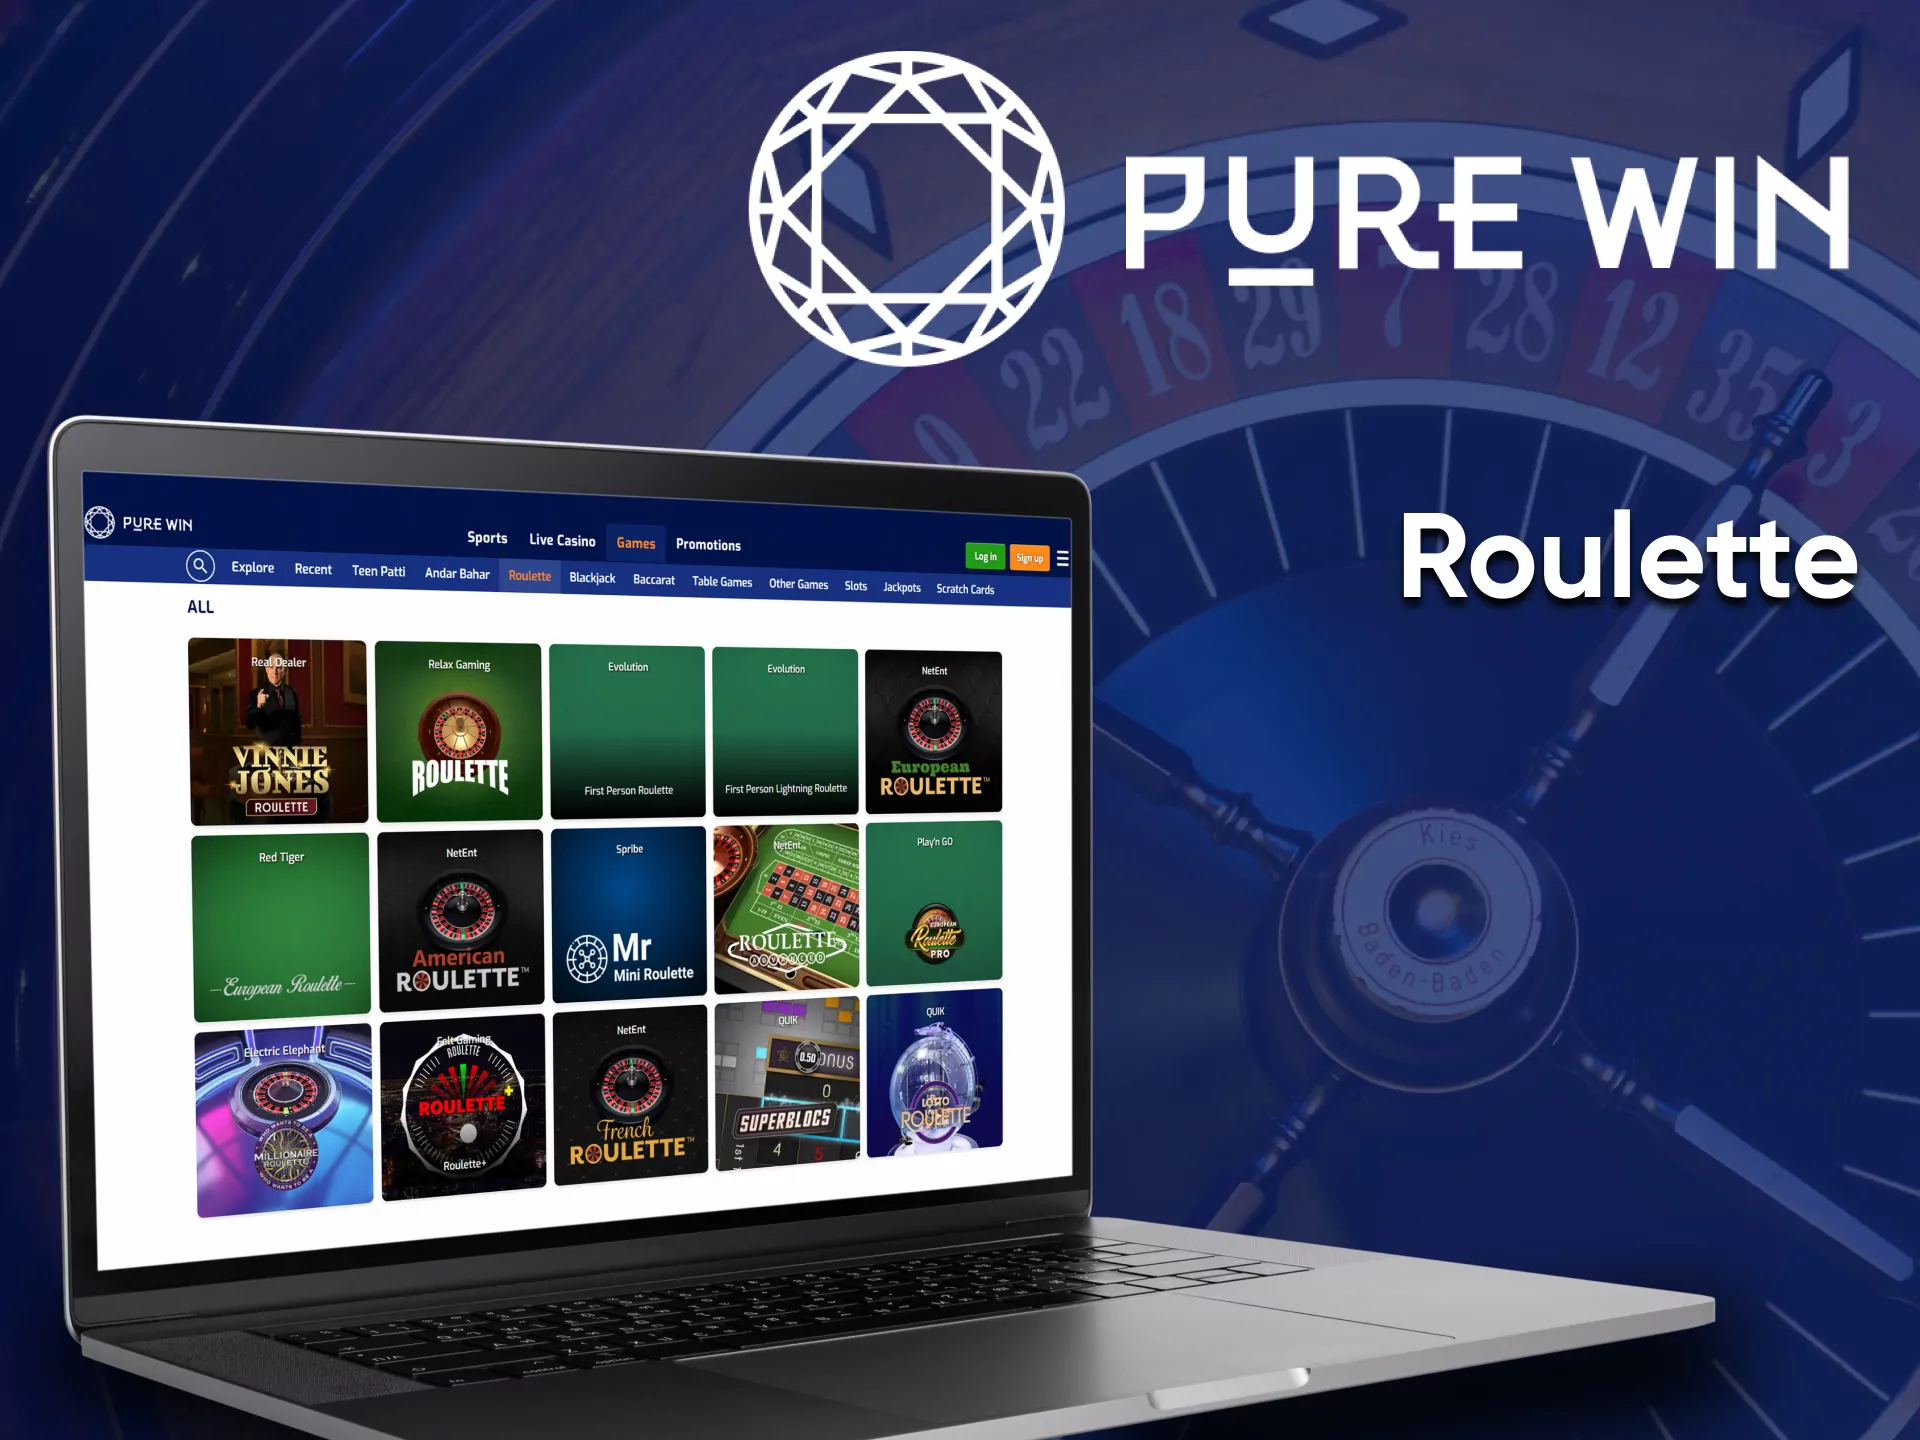 Choose a section with Roulette from Pure Win.